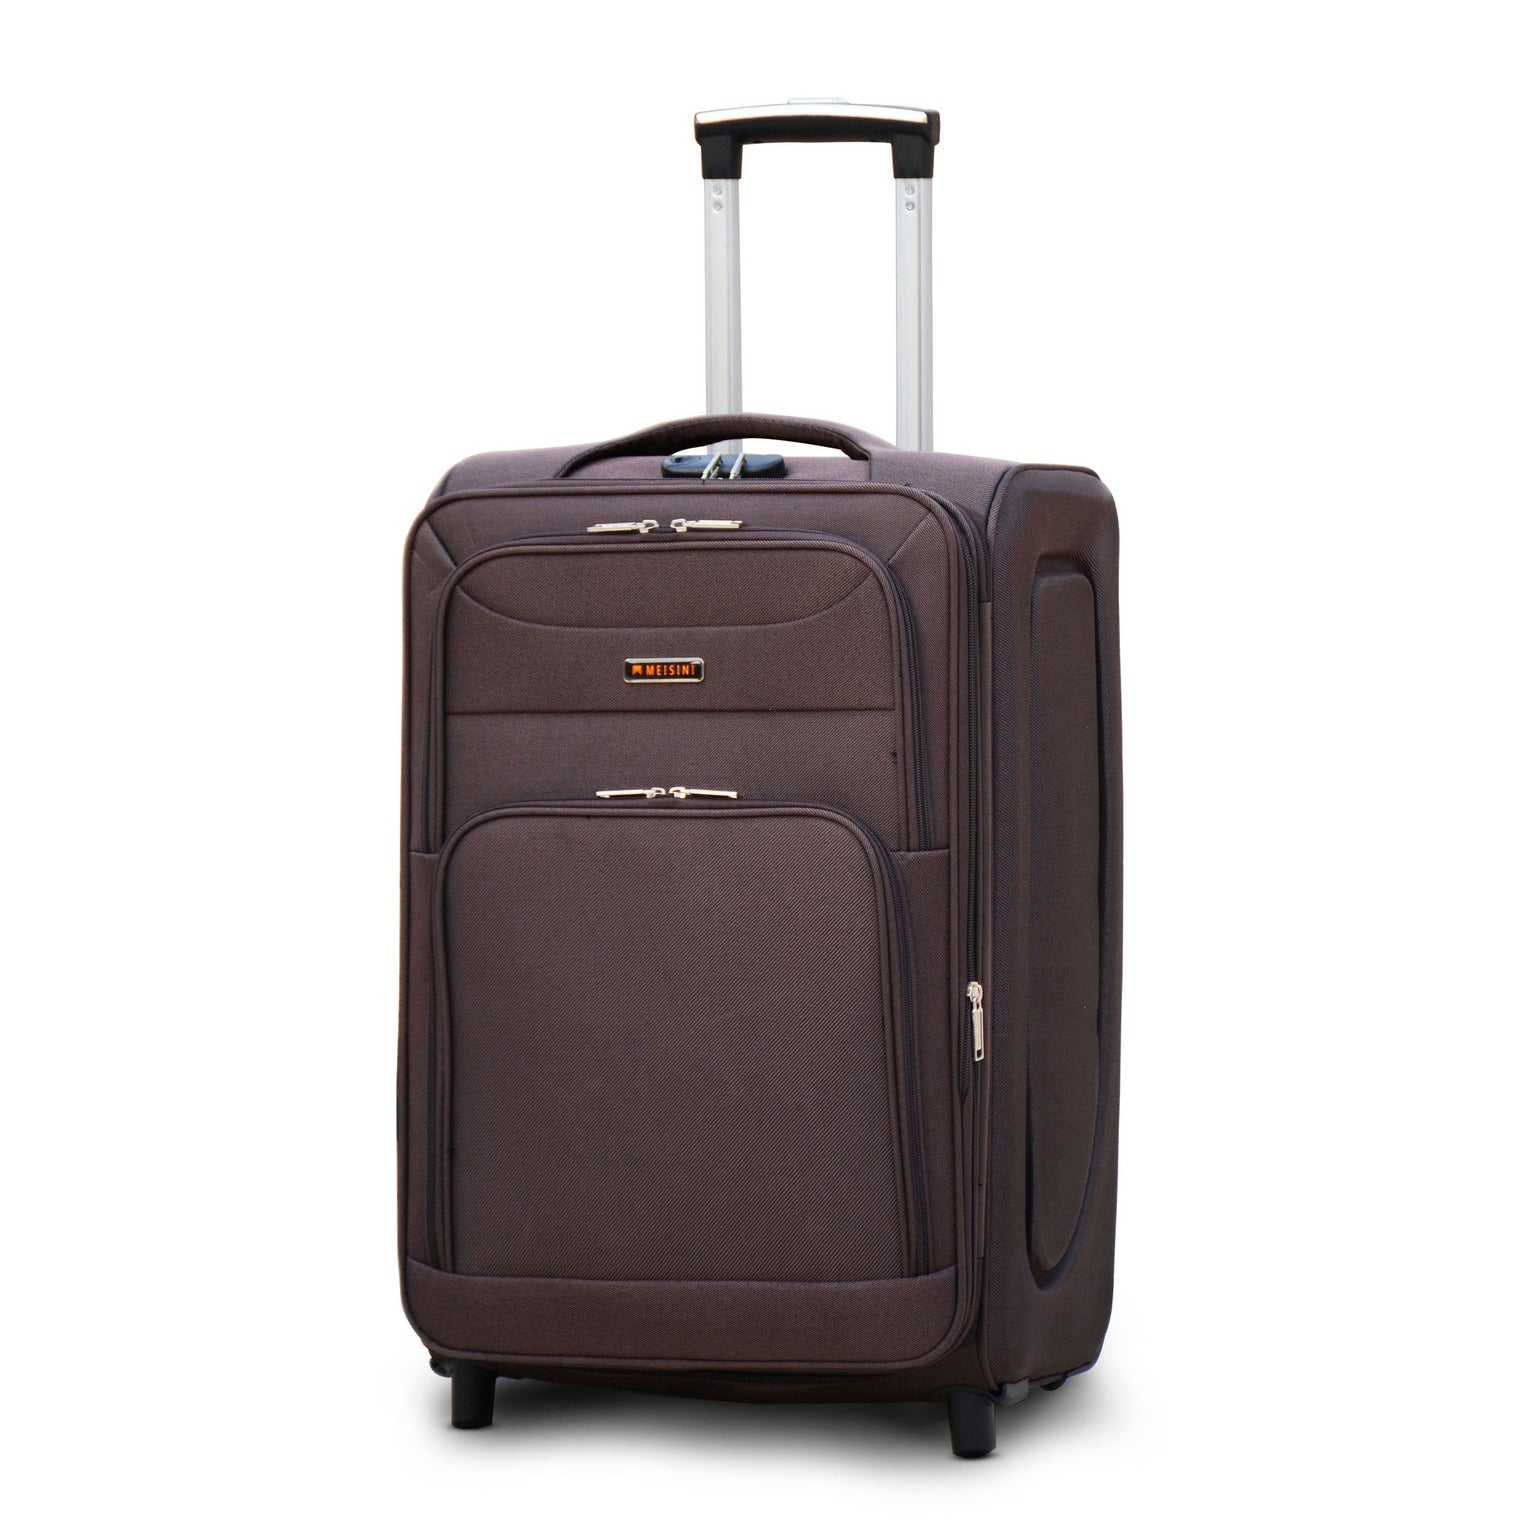 24" Coffee Colour LP 2 Wheel 0161 Luggage Lightweight Soft Material Trolley Bag Zaappy.com